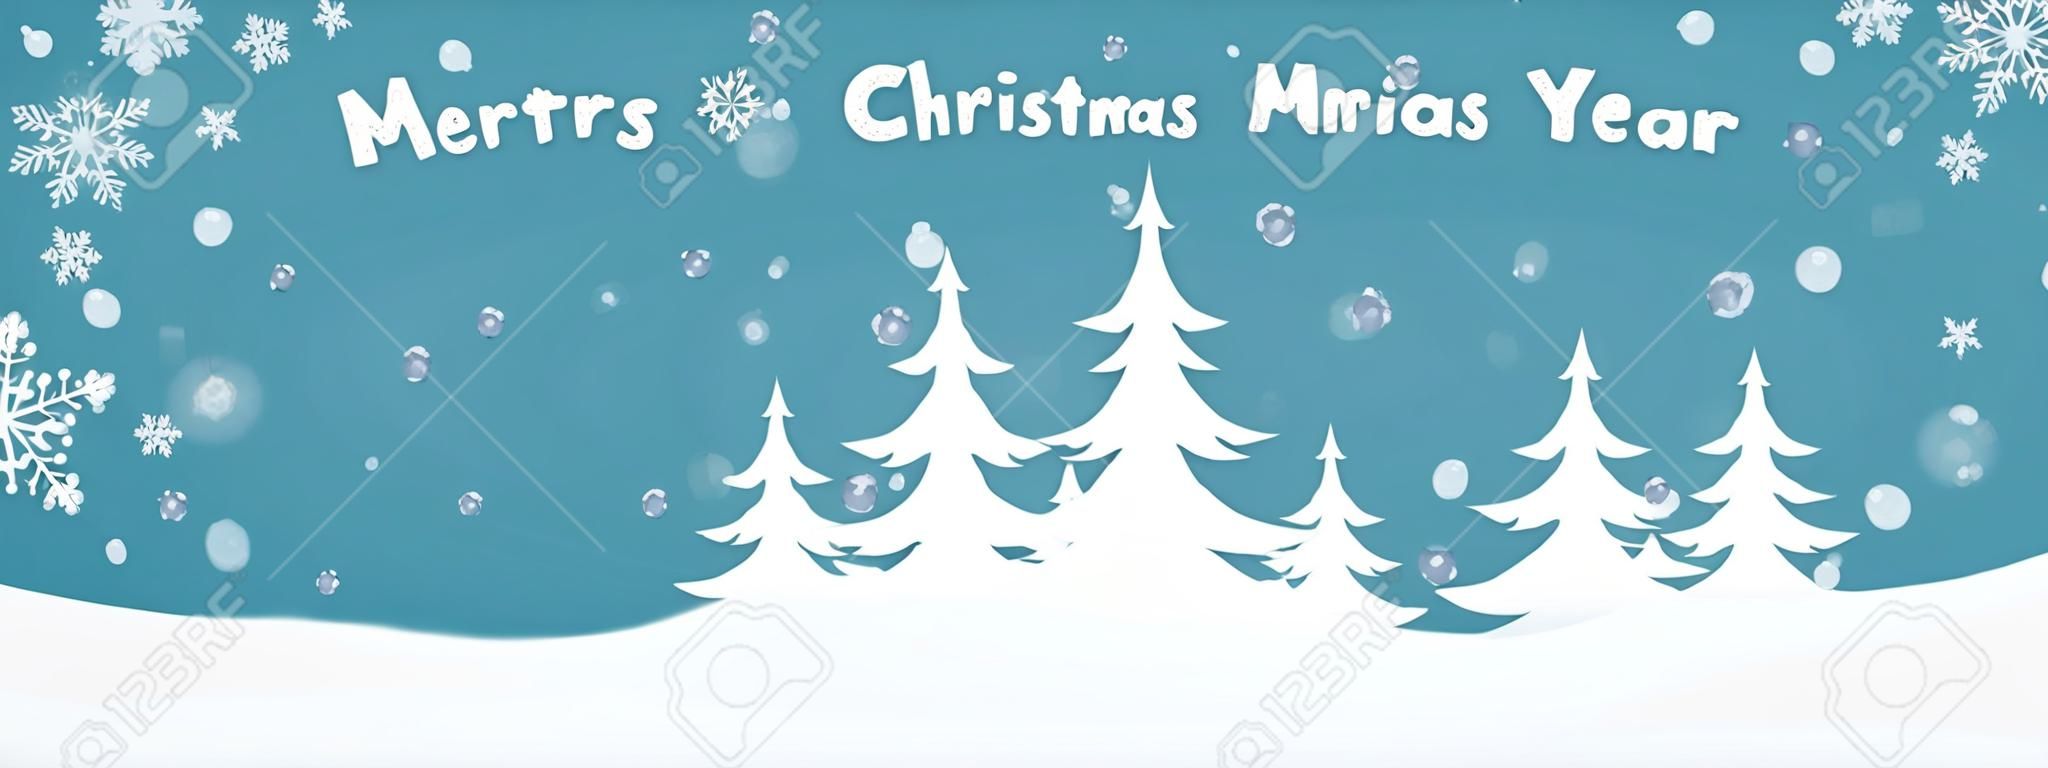 Cartoon illustration banner for holiday theme with deer on winter background. Greeting card for Merry Christmas and Happy New Year. Vector illustration